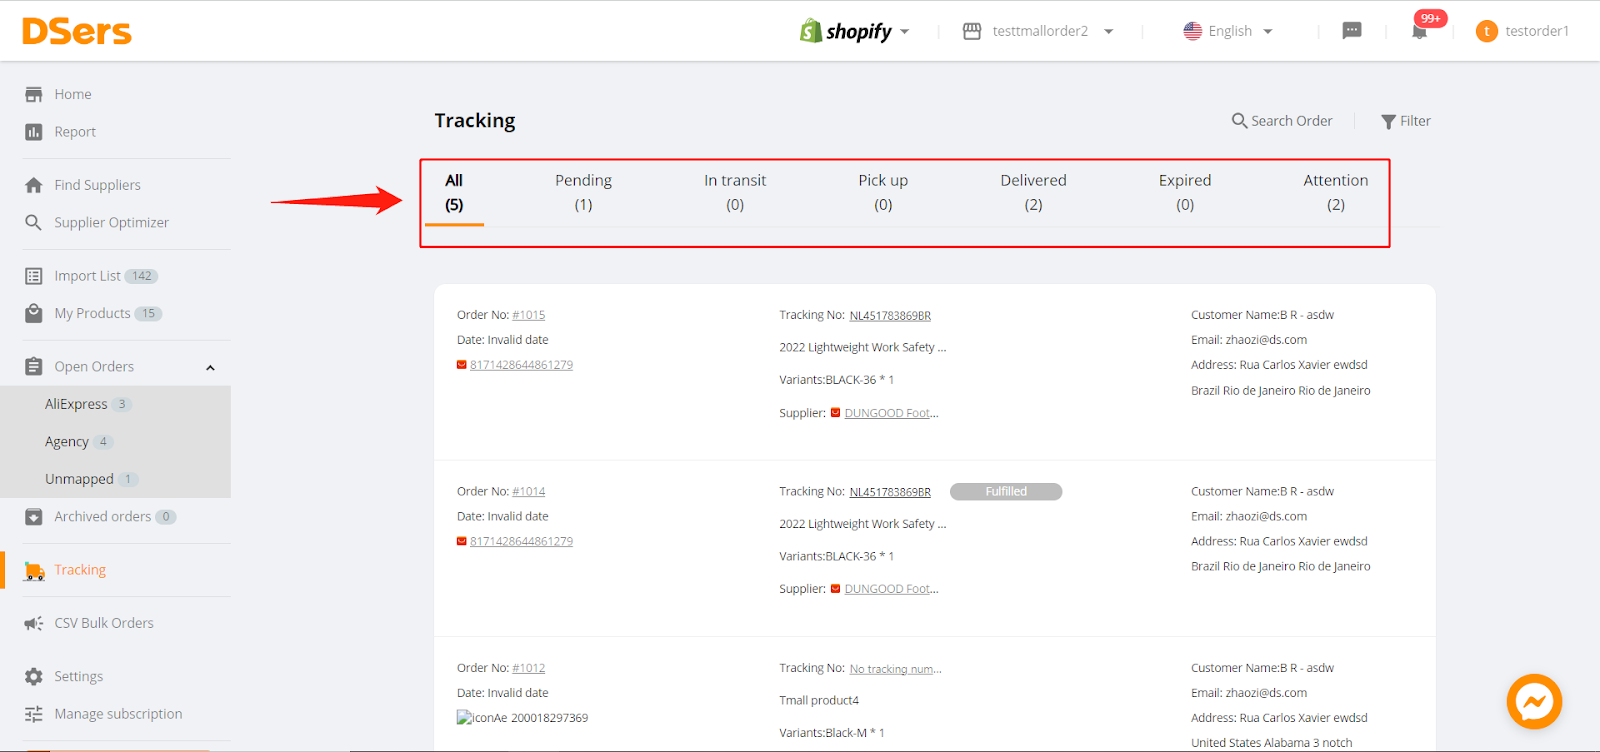 Tips for Order Tracking in Dropshipping - Work with Reliable Tracking Providers - DSers